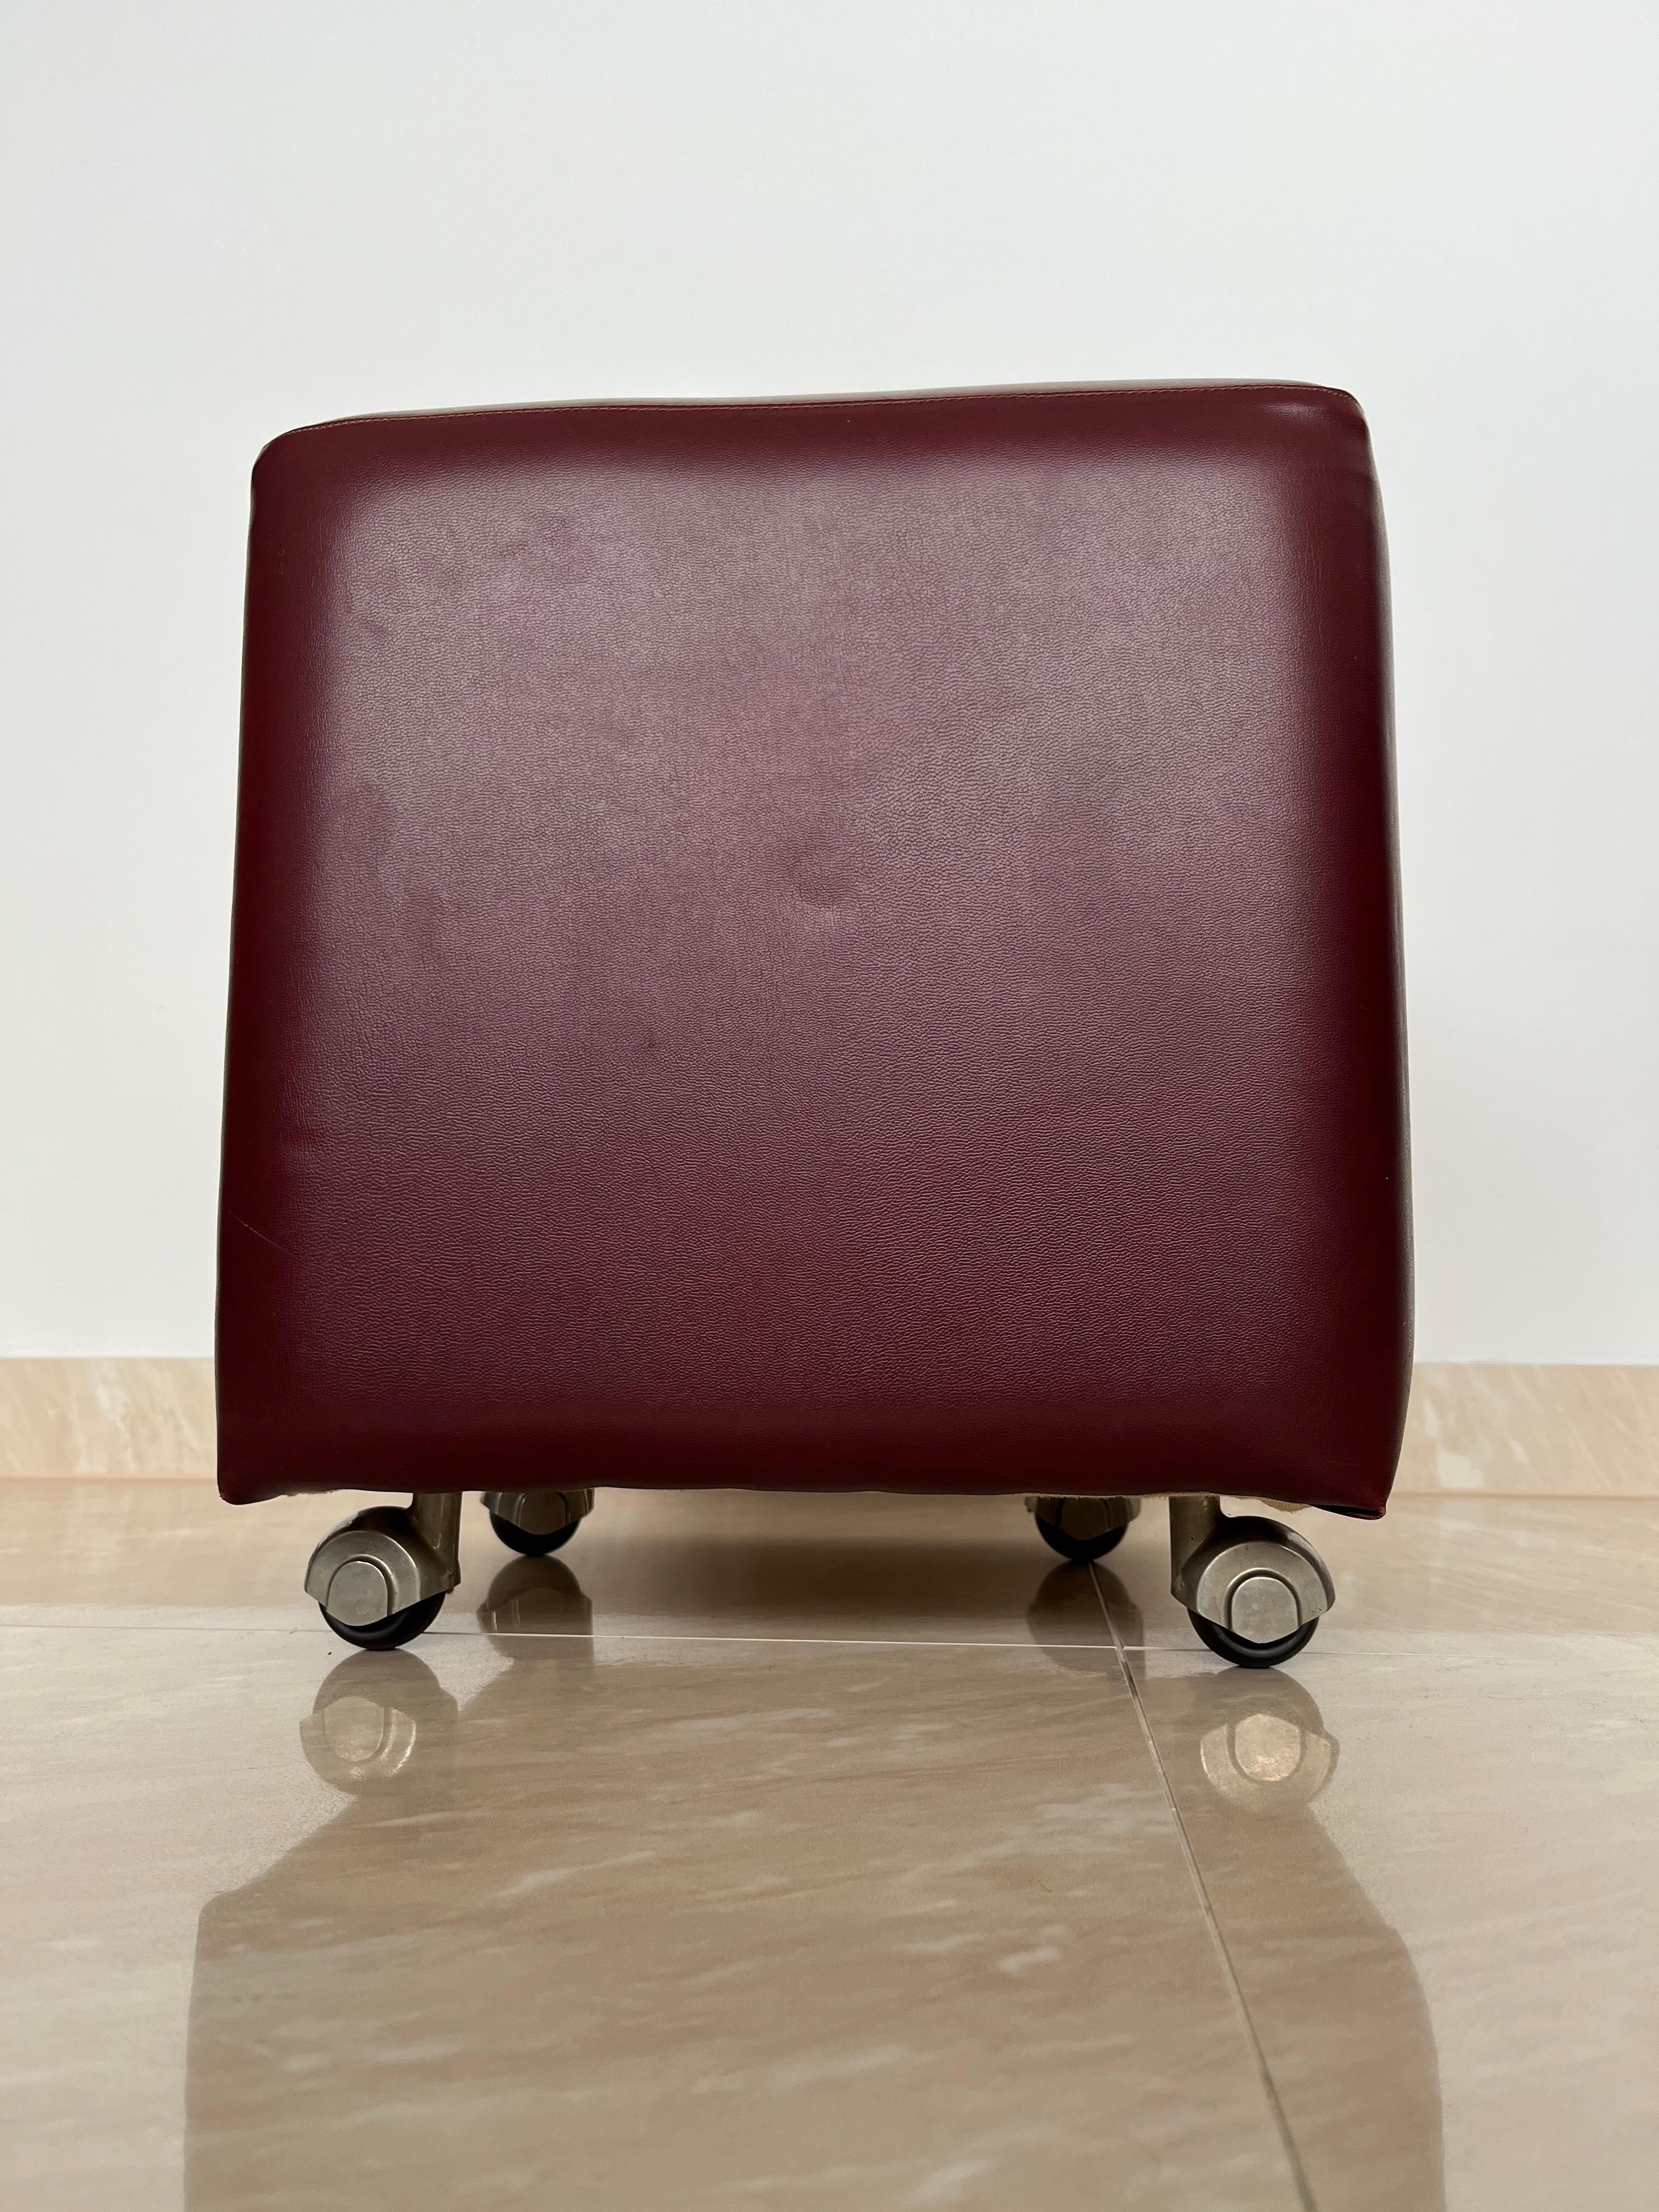 Pair of Midcentury Design Wheel Stools or Tabourets, Artificial Leather, 1970s In Good Condition For Sale In Praha, CZ